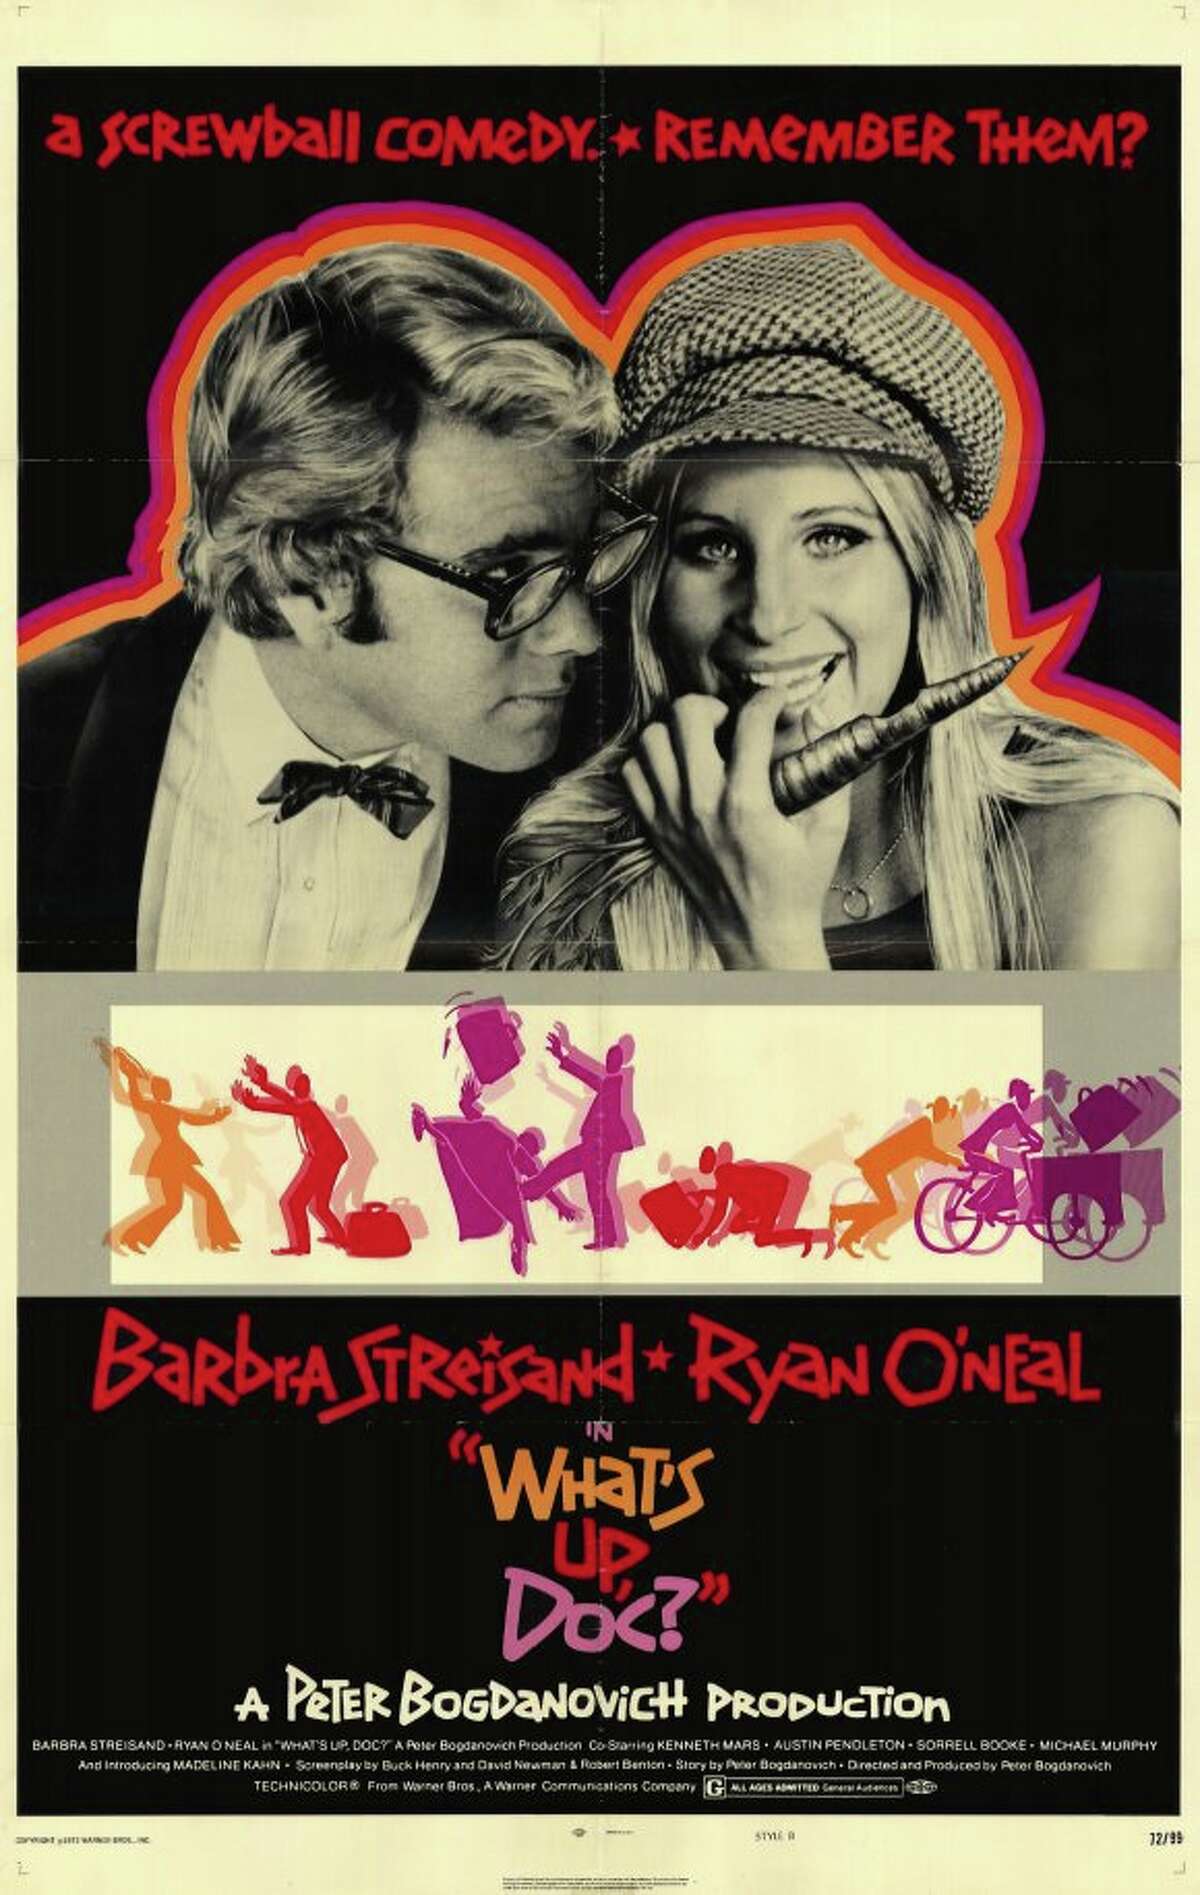 WHAT'S UP, DOC? (1972) - Peter Bogdanovich's near-flawless homage to and interpretation of the screwball comedies of the 30s and 40s. One of my early favorites from childhood. Endlessly funny. Barbra Streisand and even Ryan O'Neal are perfect. But maybe even better - and again echoing back to those older movies - the supporting cast of character actors is unparalleled: Madeline Kahn, Kenneth Mars, Austin Pendleton, Michael Murphy, Sorrell Booke, John Hillerman, Graham Jarvis, Randy Quaid, M. Emmet Walsh, et al. Also, the San Francisco locations are fantastic.